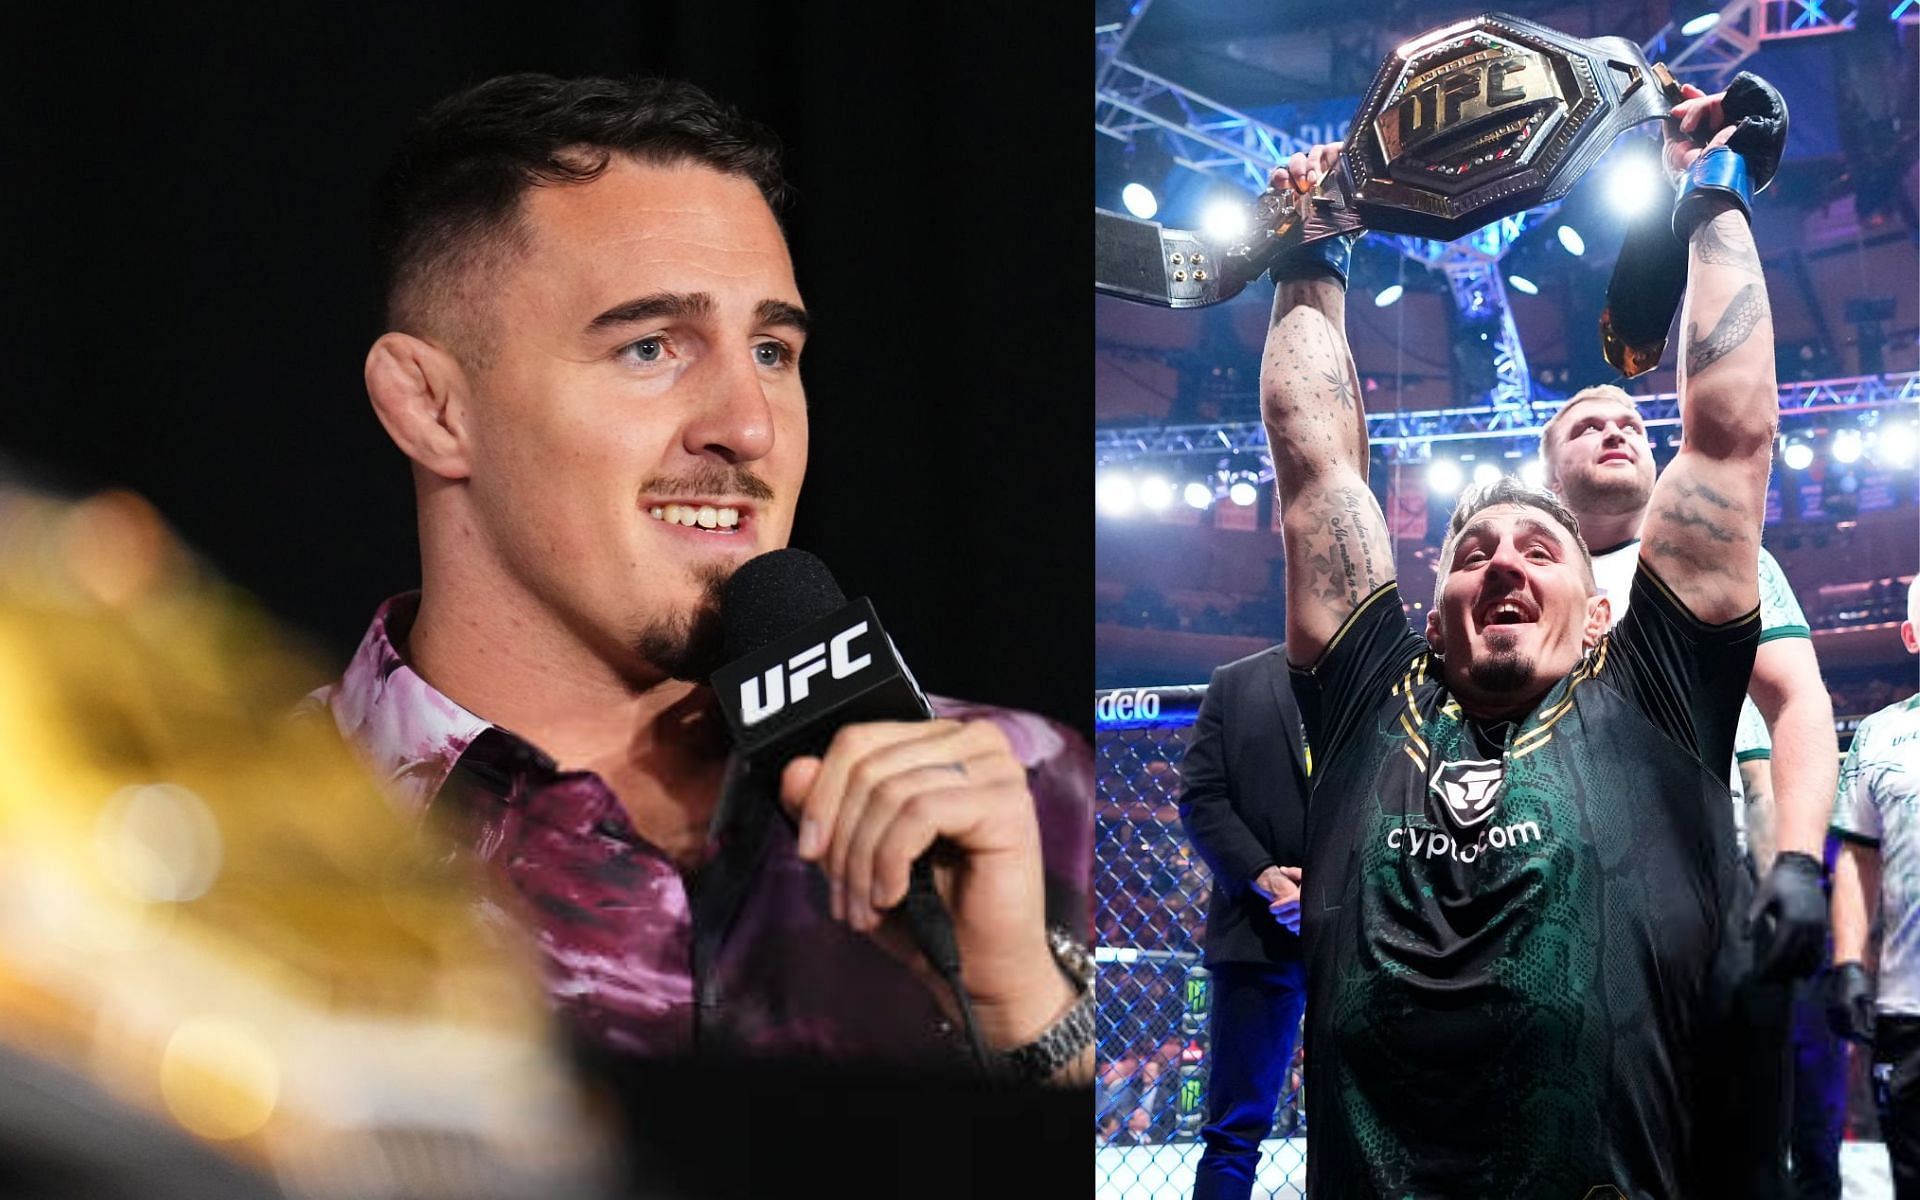 Tom Aspinall (left) and Aspinall at UFC 295 (right) [Images Courtesy: @GettyImages]